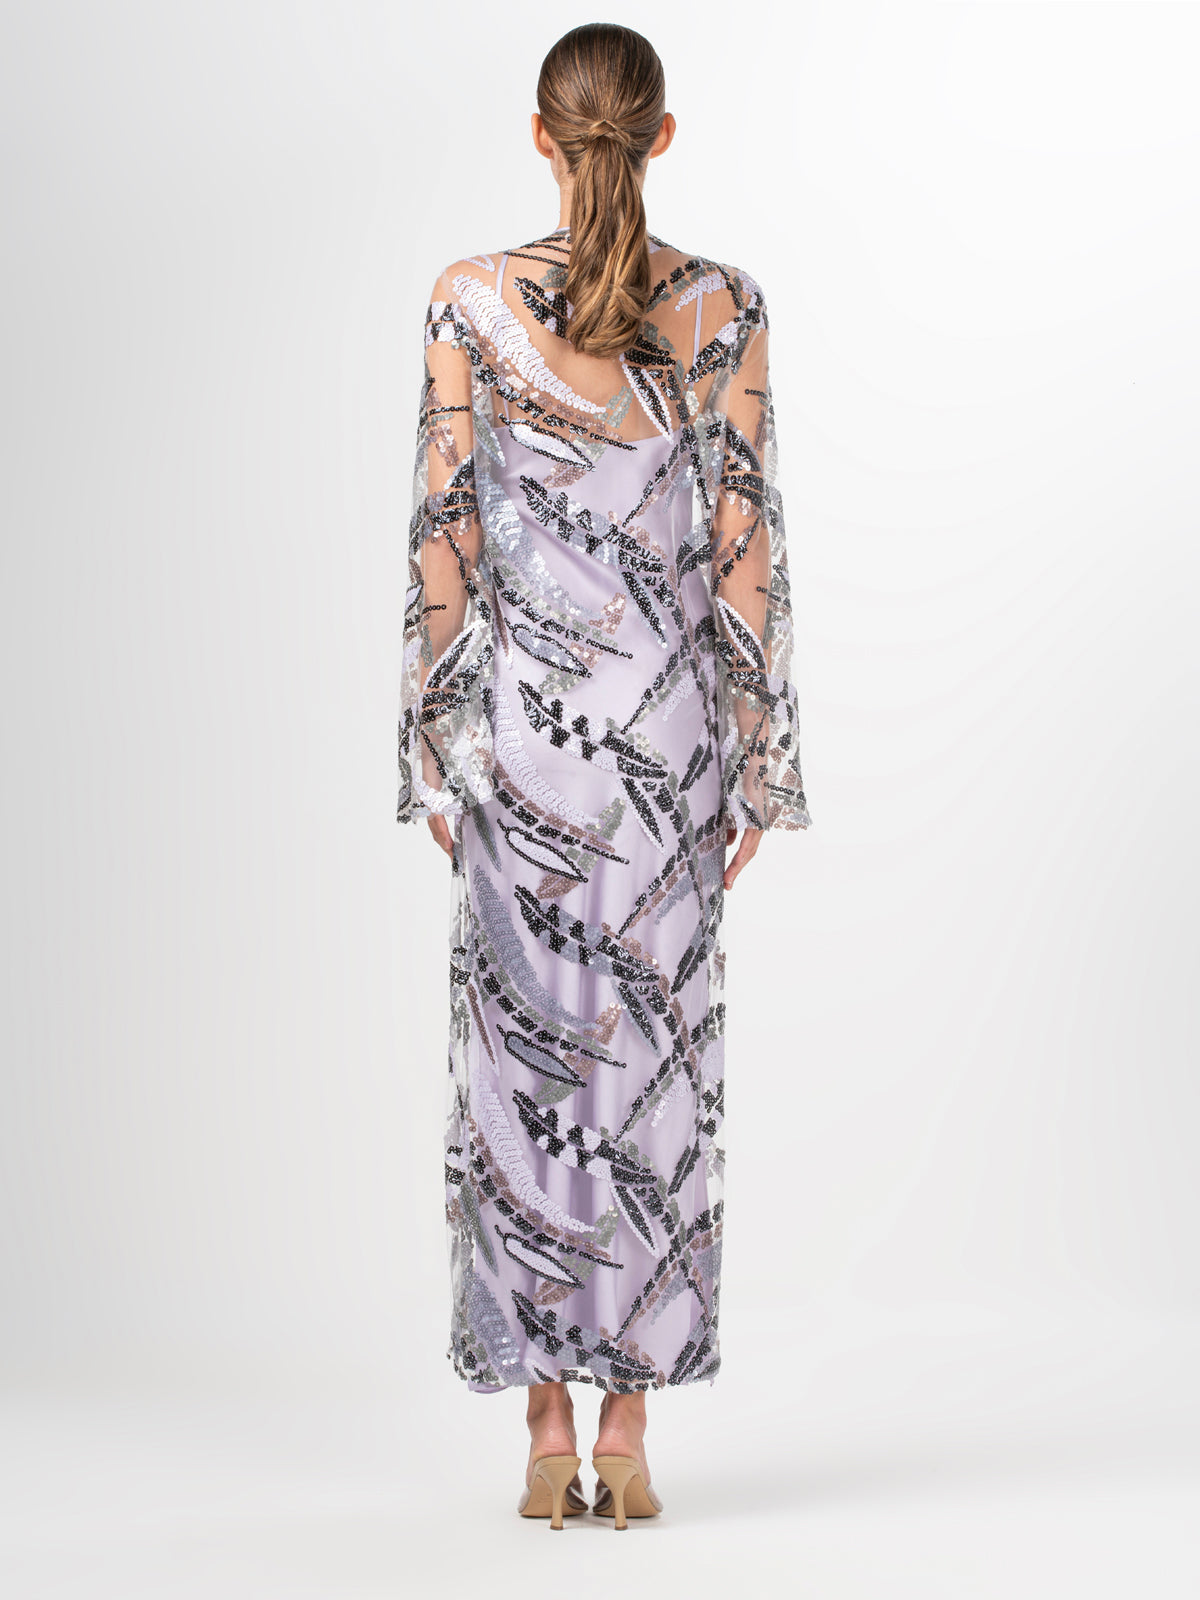 Andria Dress Lavender and Silver with a black and white print.